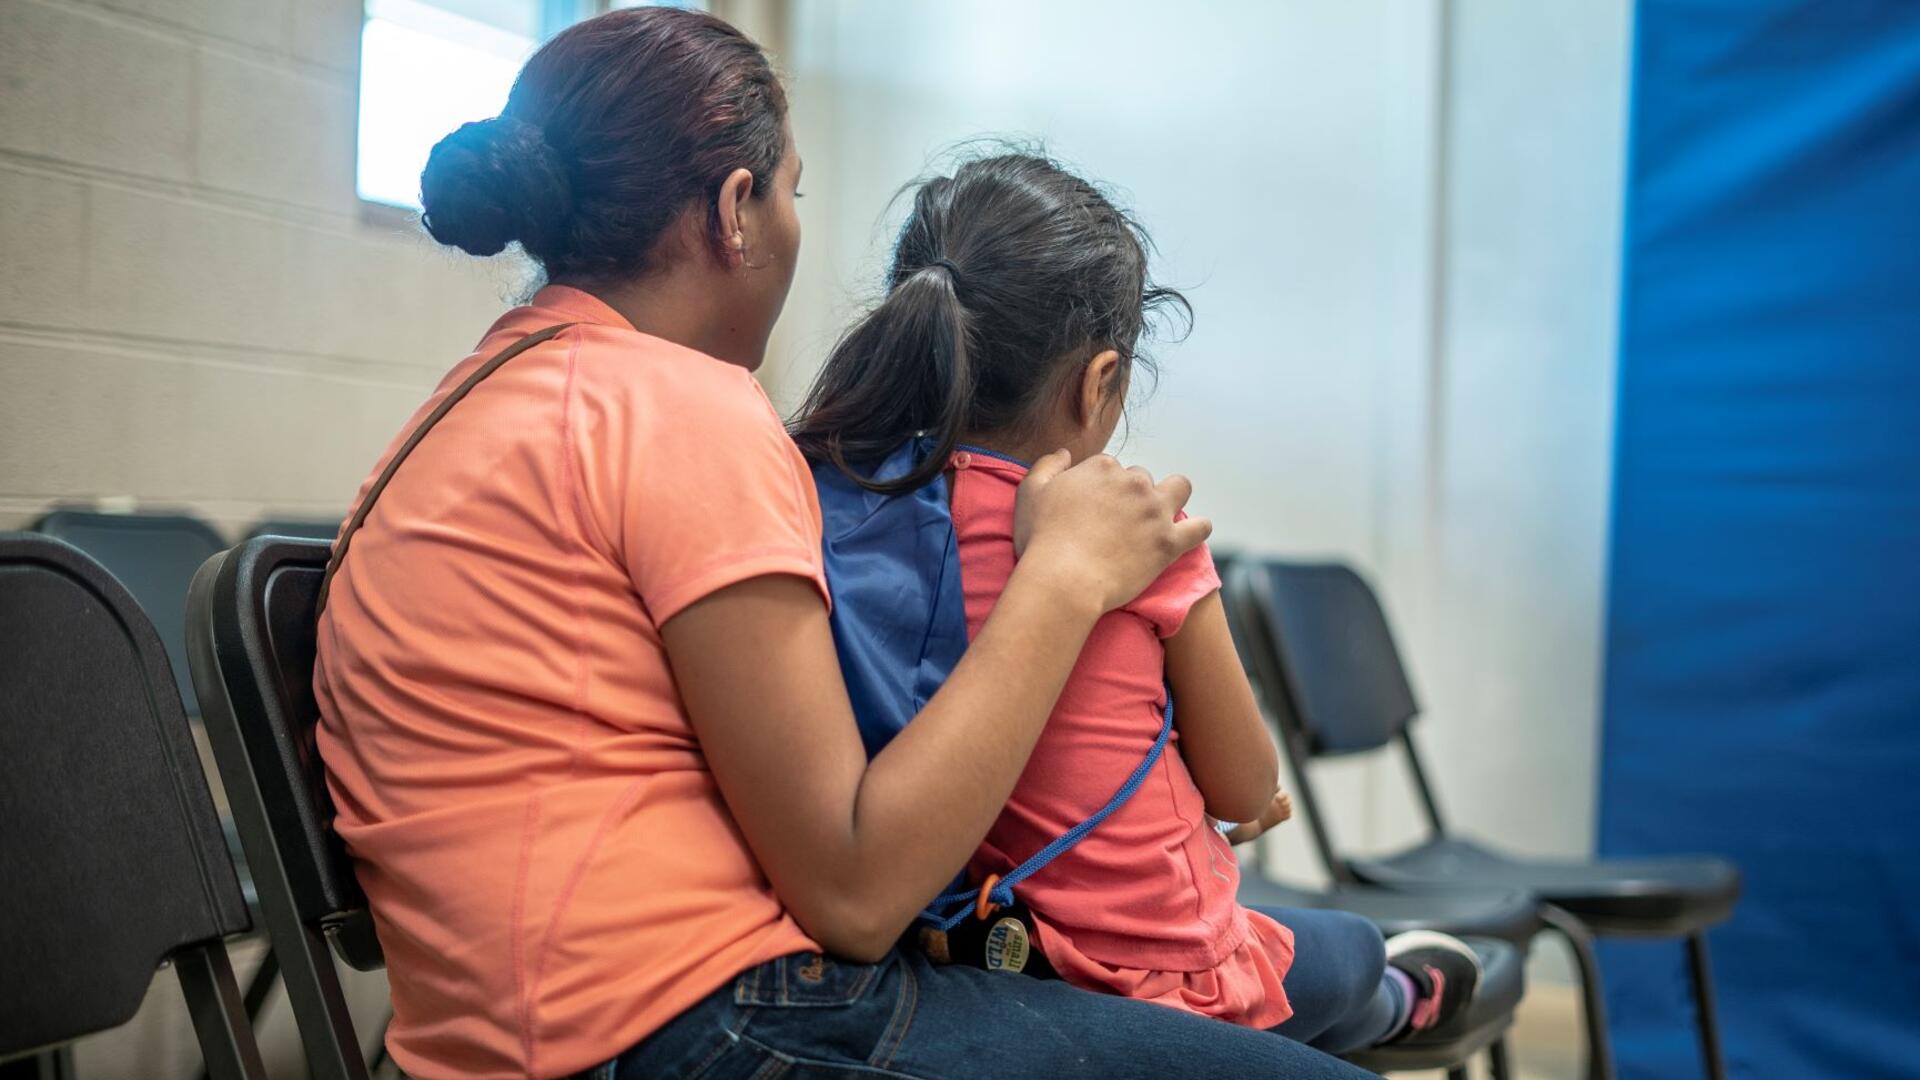 Emilia, 21, holds her 4-year-old daughter at the shelter in Phoenix where the IRC welcomed them after they were detained while fleeing to the U.S. from Honduras.